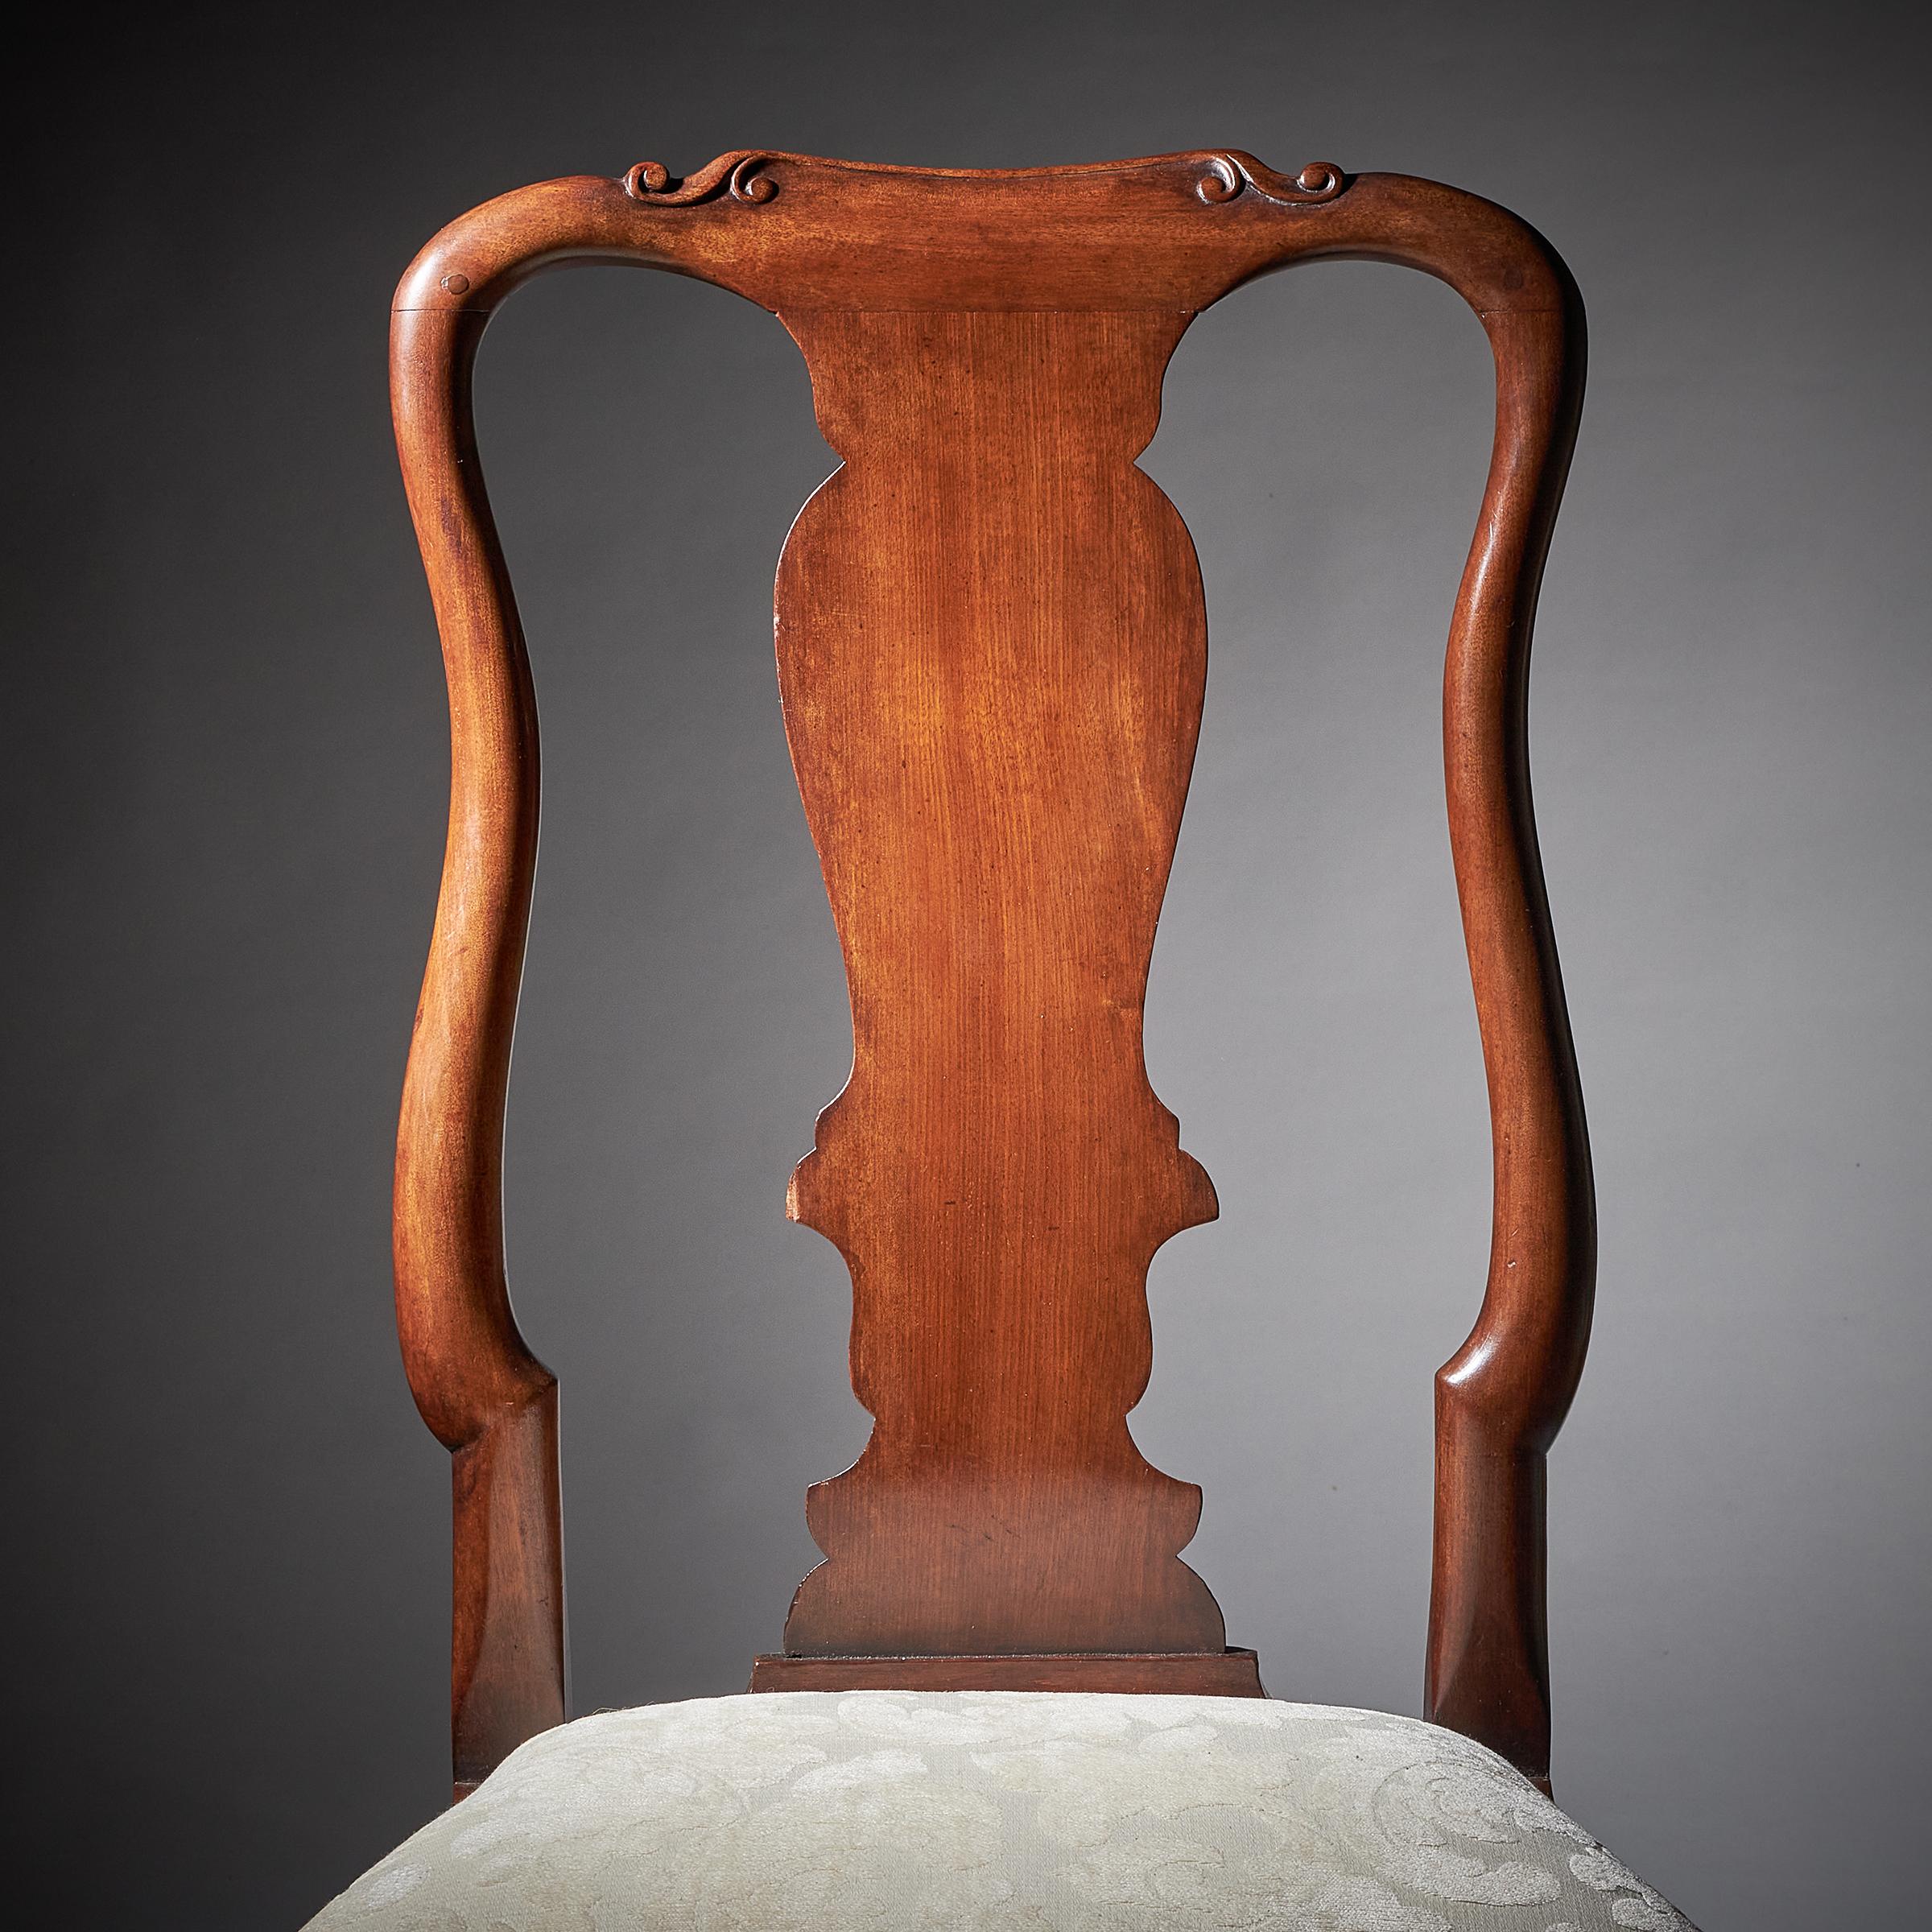 A superb pair of early 18th-century carved George I mahogany chairs, circa 1720.

Each chair is of rich colour, patination and carved throughout.

The shaped crest rails have two scrolls on each end joining to cascading s-scroll styles and